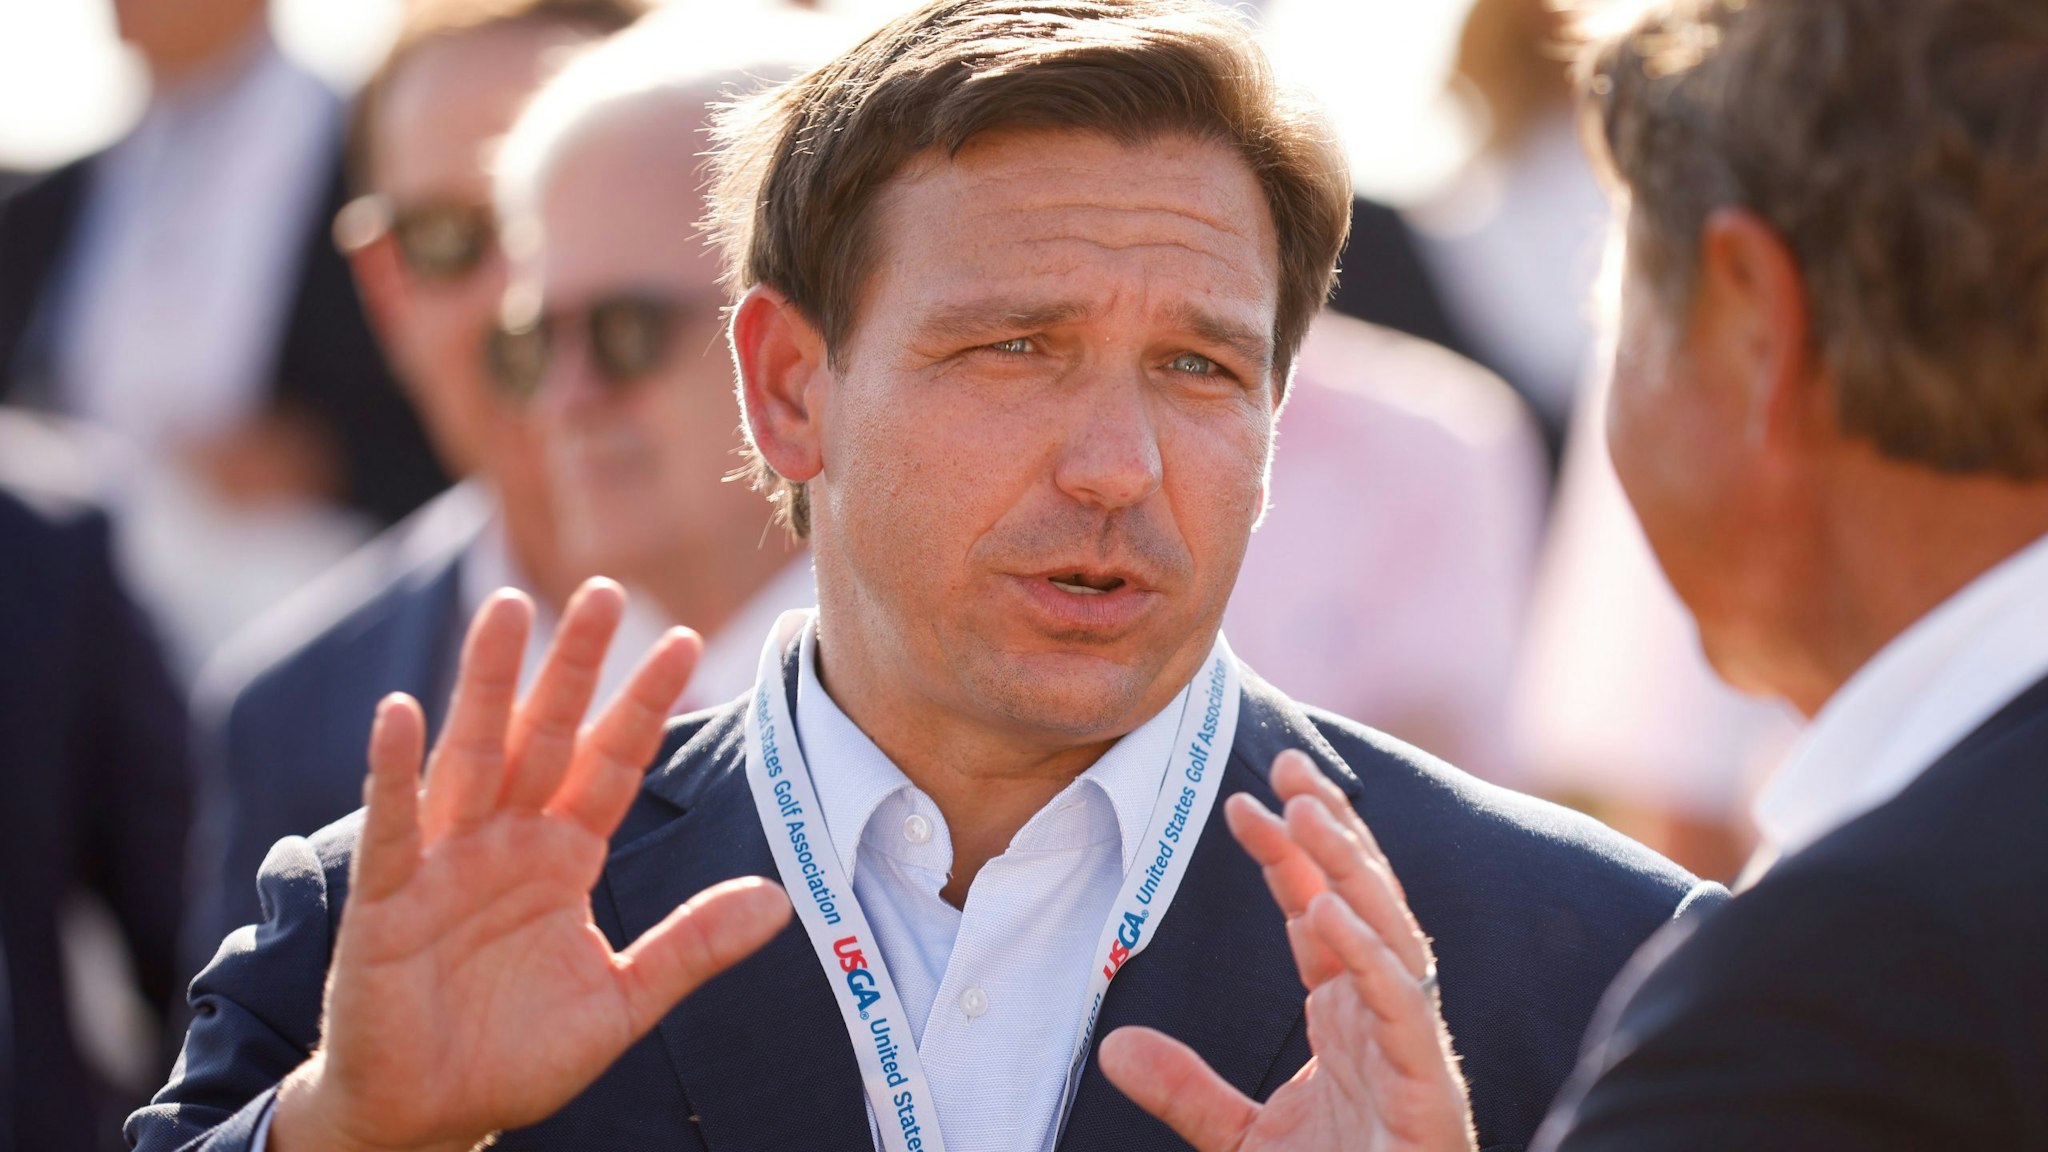 JUNO BEACH, FLORIDA - MAY 07: Florida Gov. Ron DeSantis attends the flag raising ceremony prior to The Walker Cup at Seminole Golf Club on May 07, 2021 in Juno Beach, Florida.